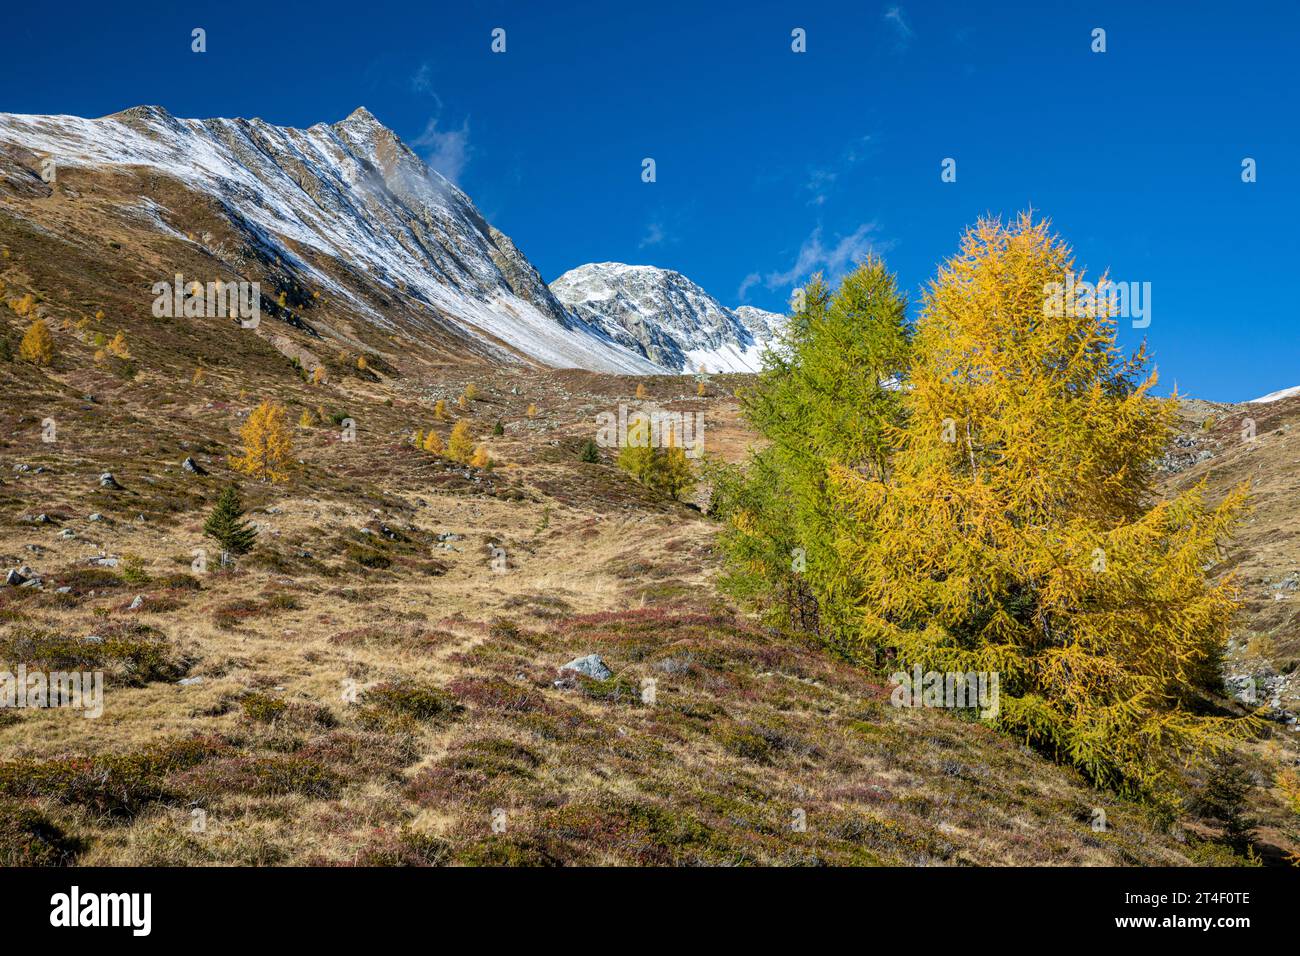 Scenic autumn view with snow covered mountains and golden larch trees, near Davos, Switzerland Stock Photo